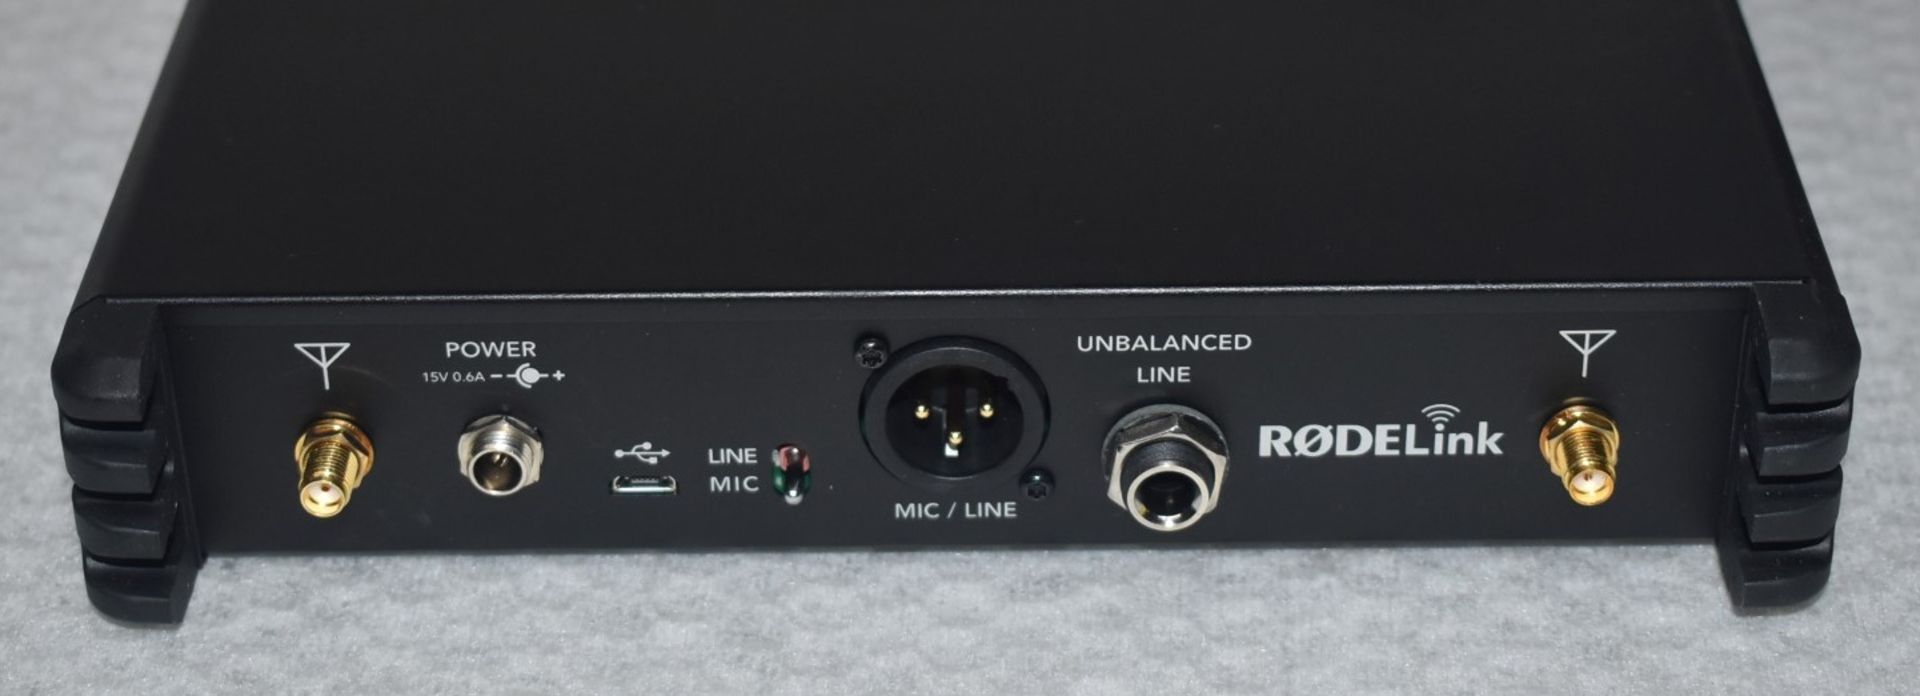 1 x Rode RODELink Performer Kit - 2.4ghz Digital Wireless Audio System With TX-M2 Wireless Condenser - Image 13 of 13